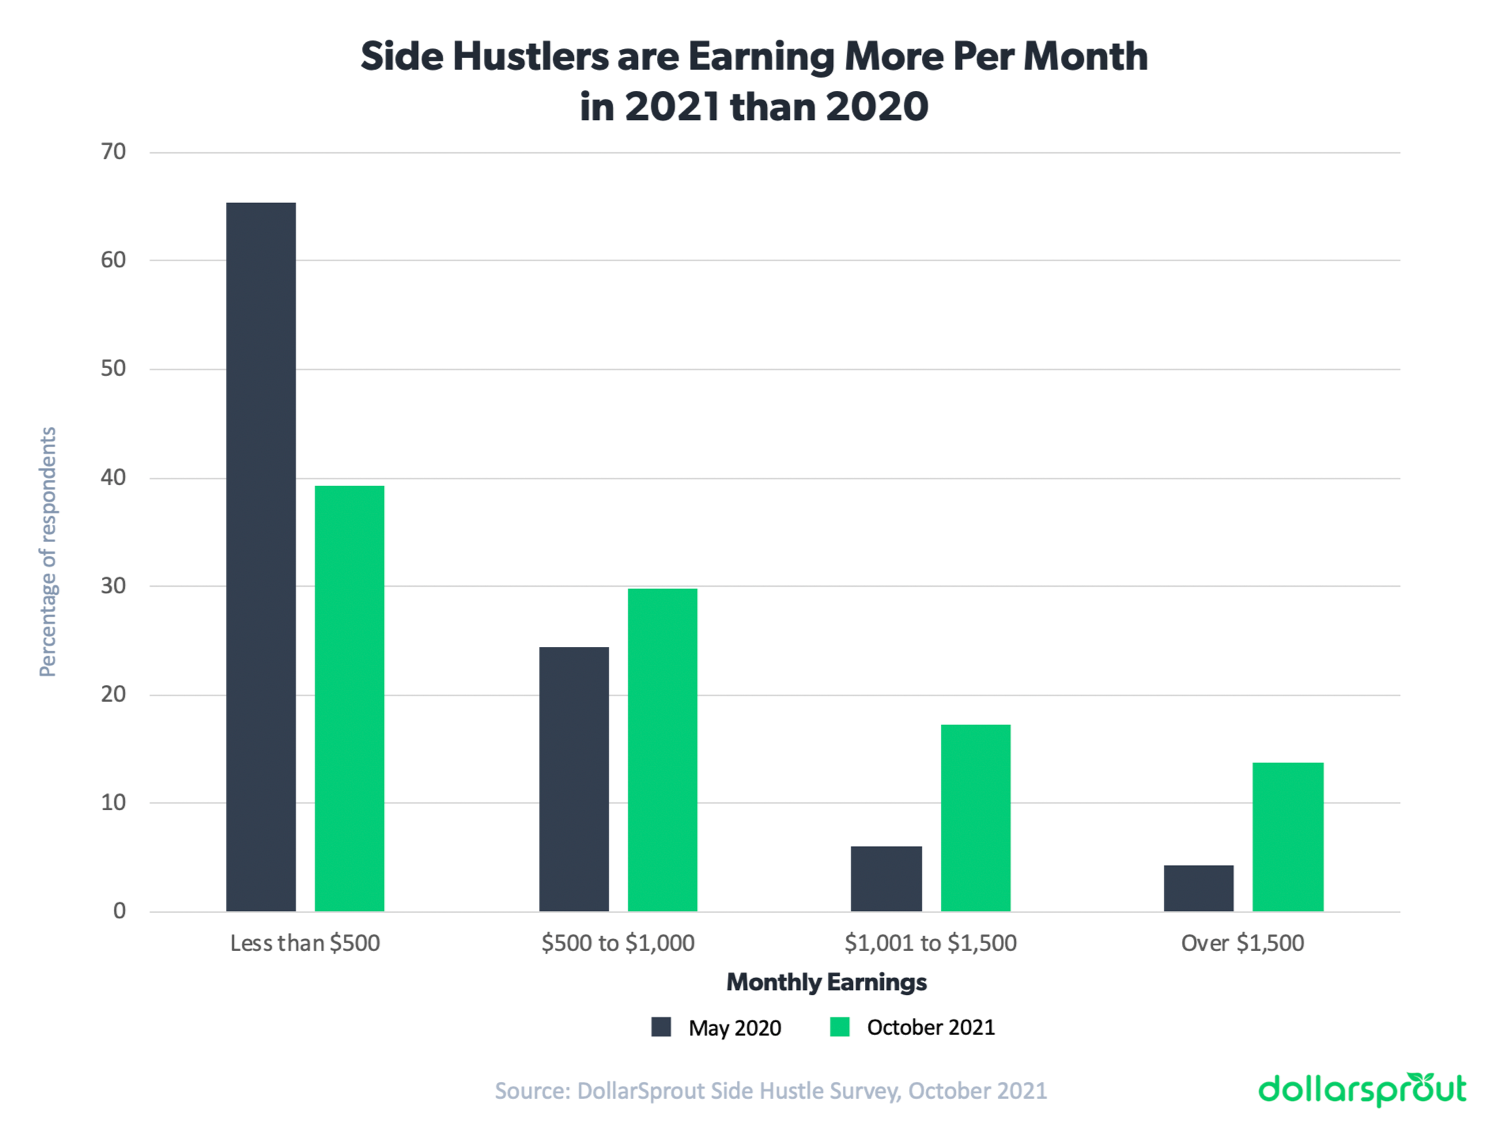 Chart showing that side hustlers, on average, are earning more per month in 2021 than in 2020.